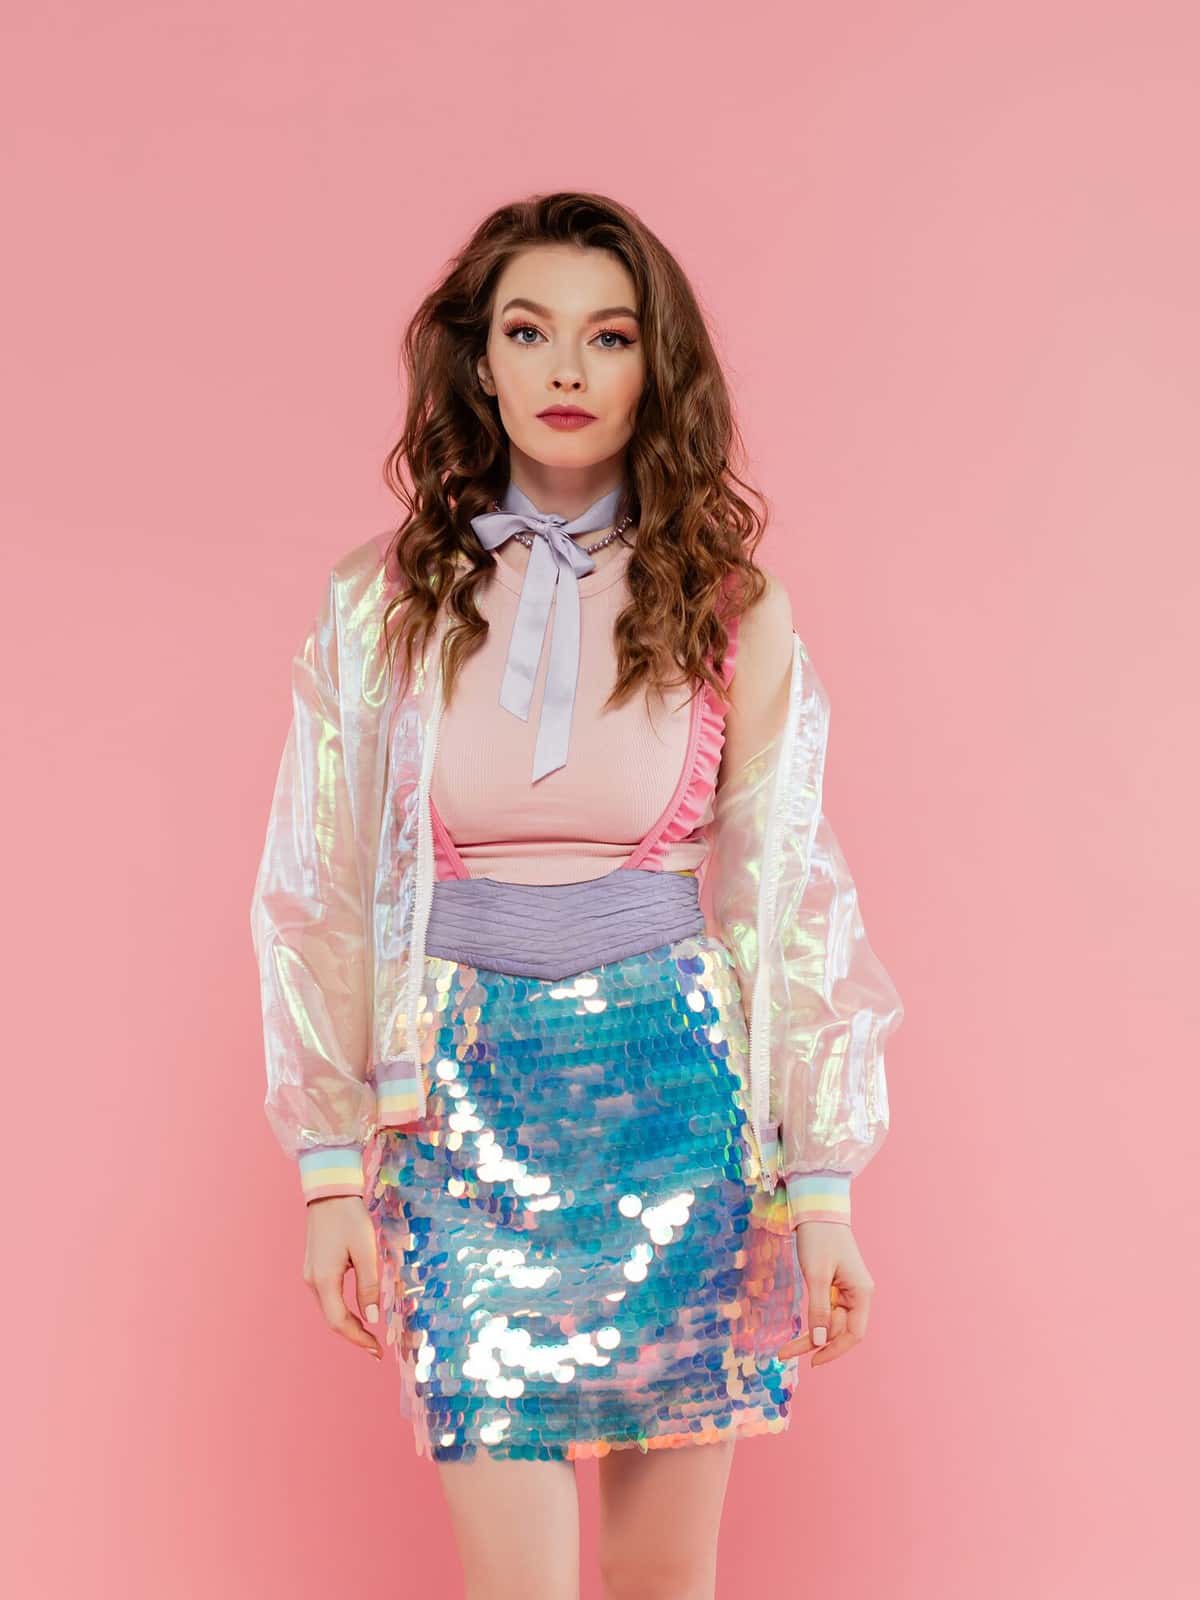 beautiful woman with wavy hair posing like a doll on pink background, conceptual photography, girly outfit, model in skirt with sequins and transparent jacket looking at camera